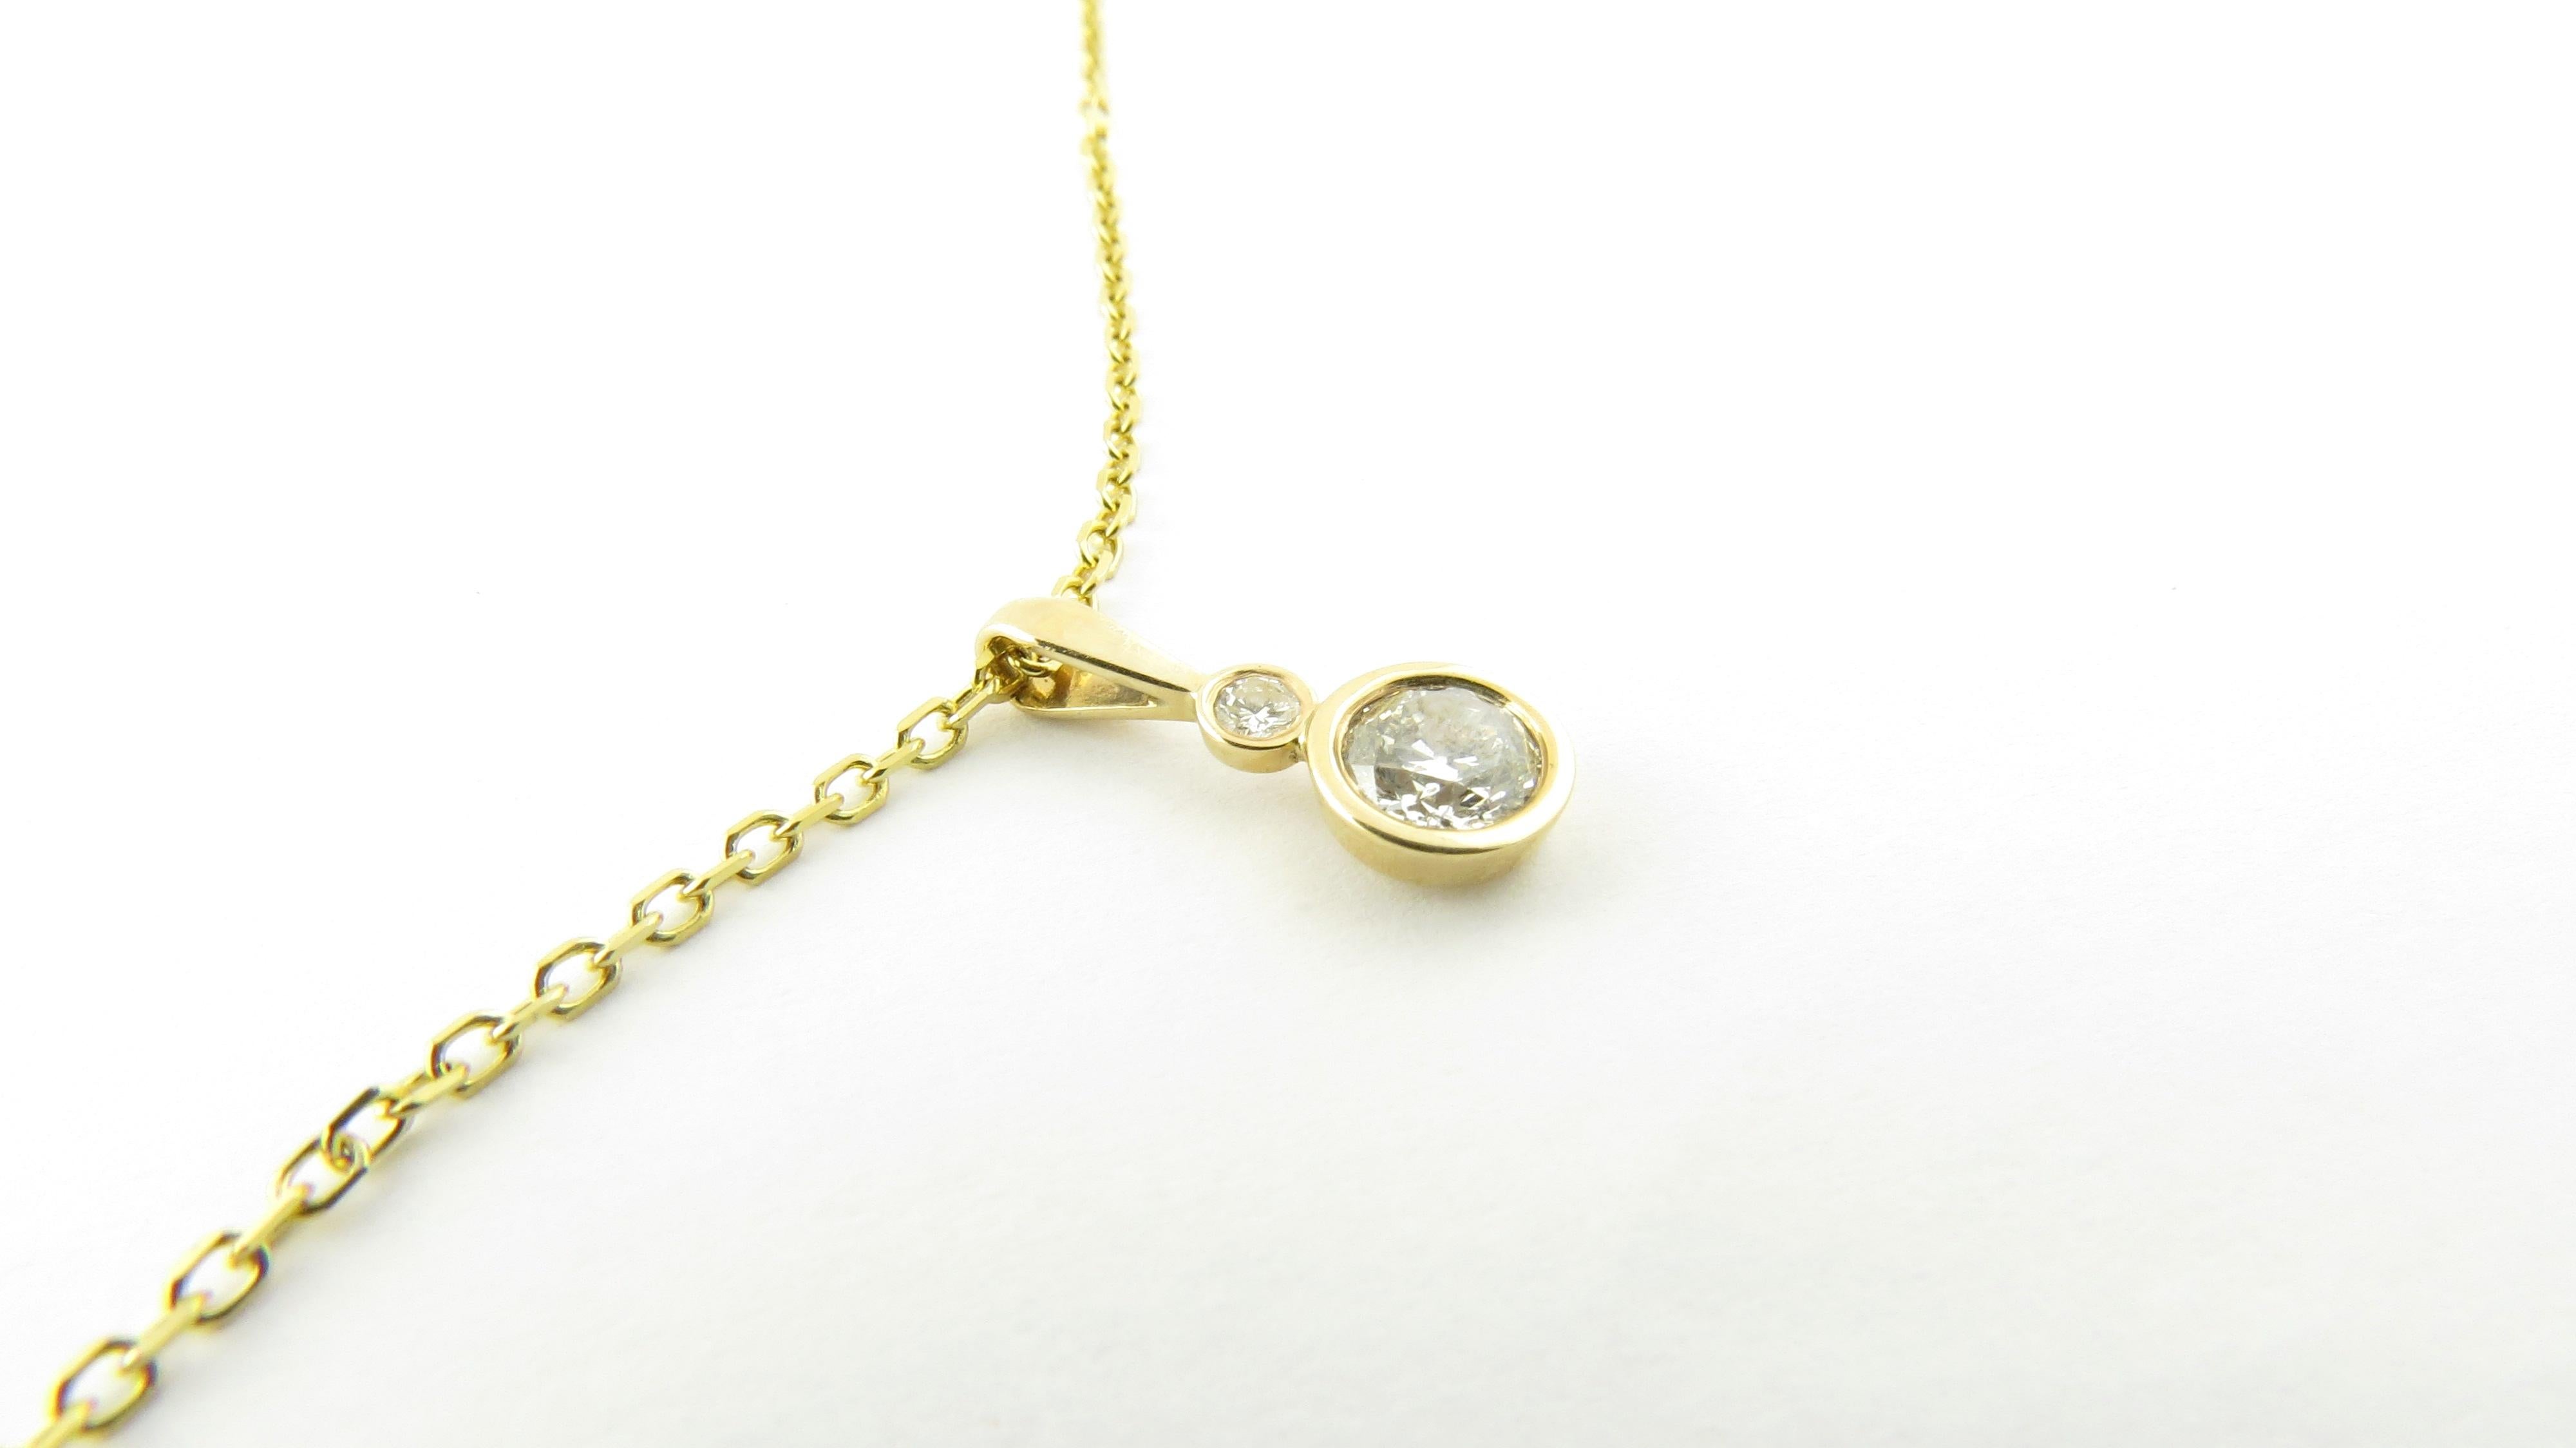 Vintage 14 Karat Yellow Gold Diamond Pendant Necklace-

This stunning pendant features two round brilliant cut diamonds (.04 ct., .50 ct.) bezel set in classic 14K yellow gold. Suspended from an elegant 16 